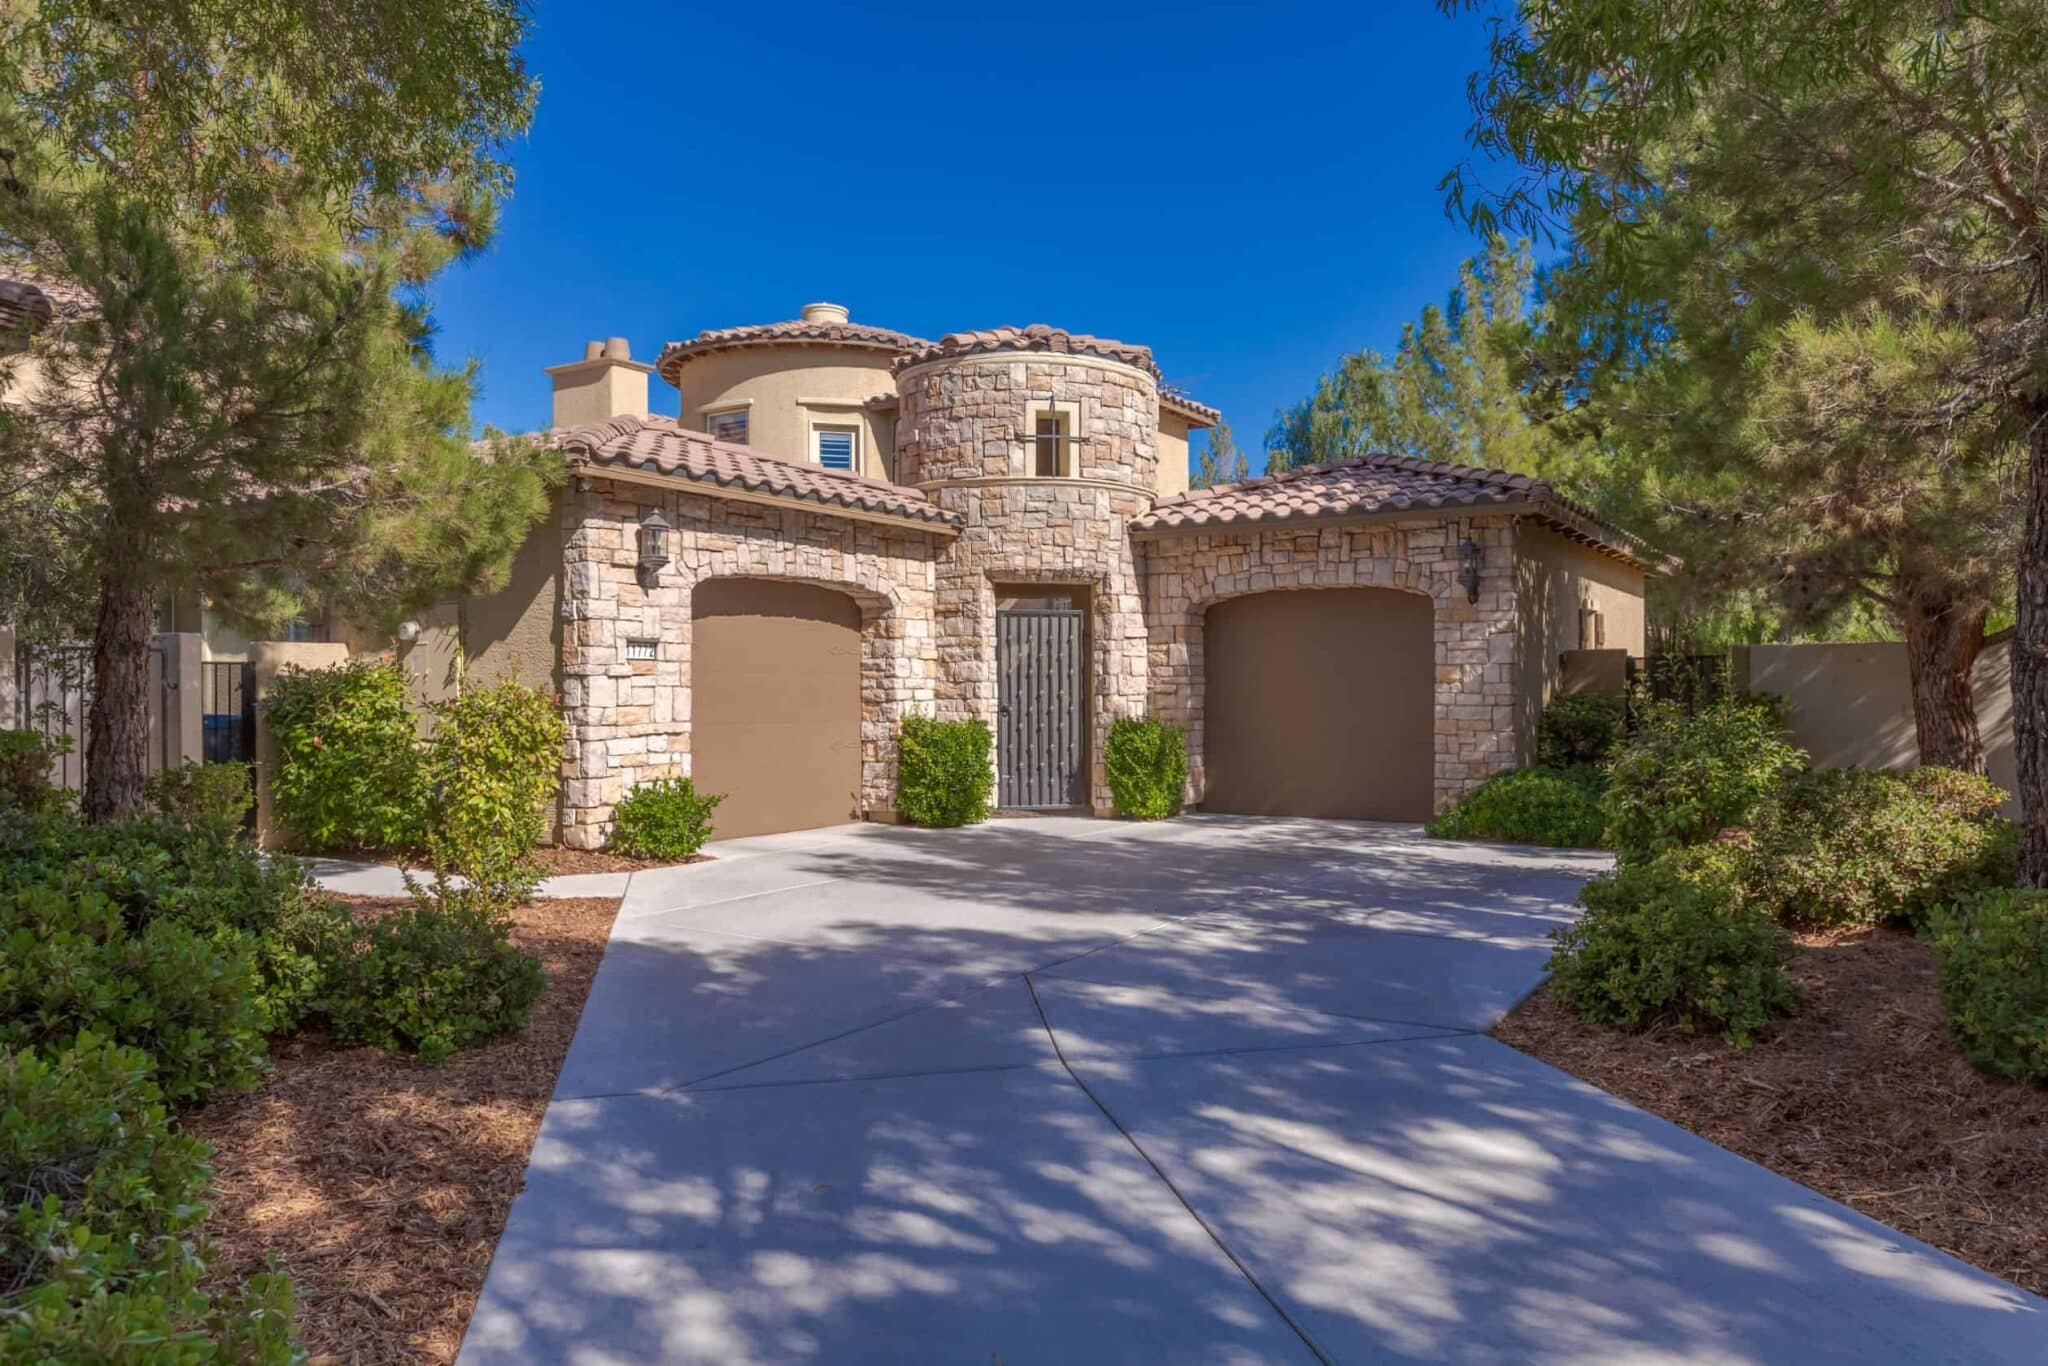 las-vegas-luxry-real-estate-realtor-rob-jensen-company-11772-canons-brooks-drive-southern-highlands03